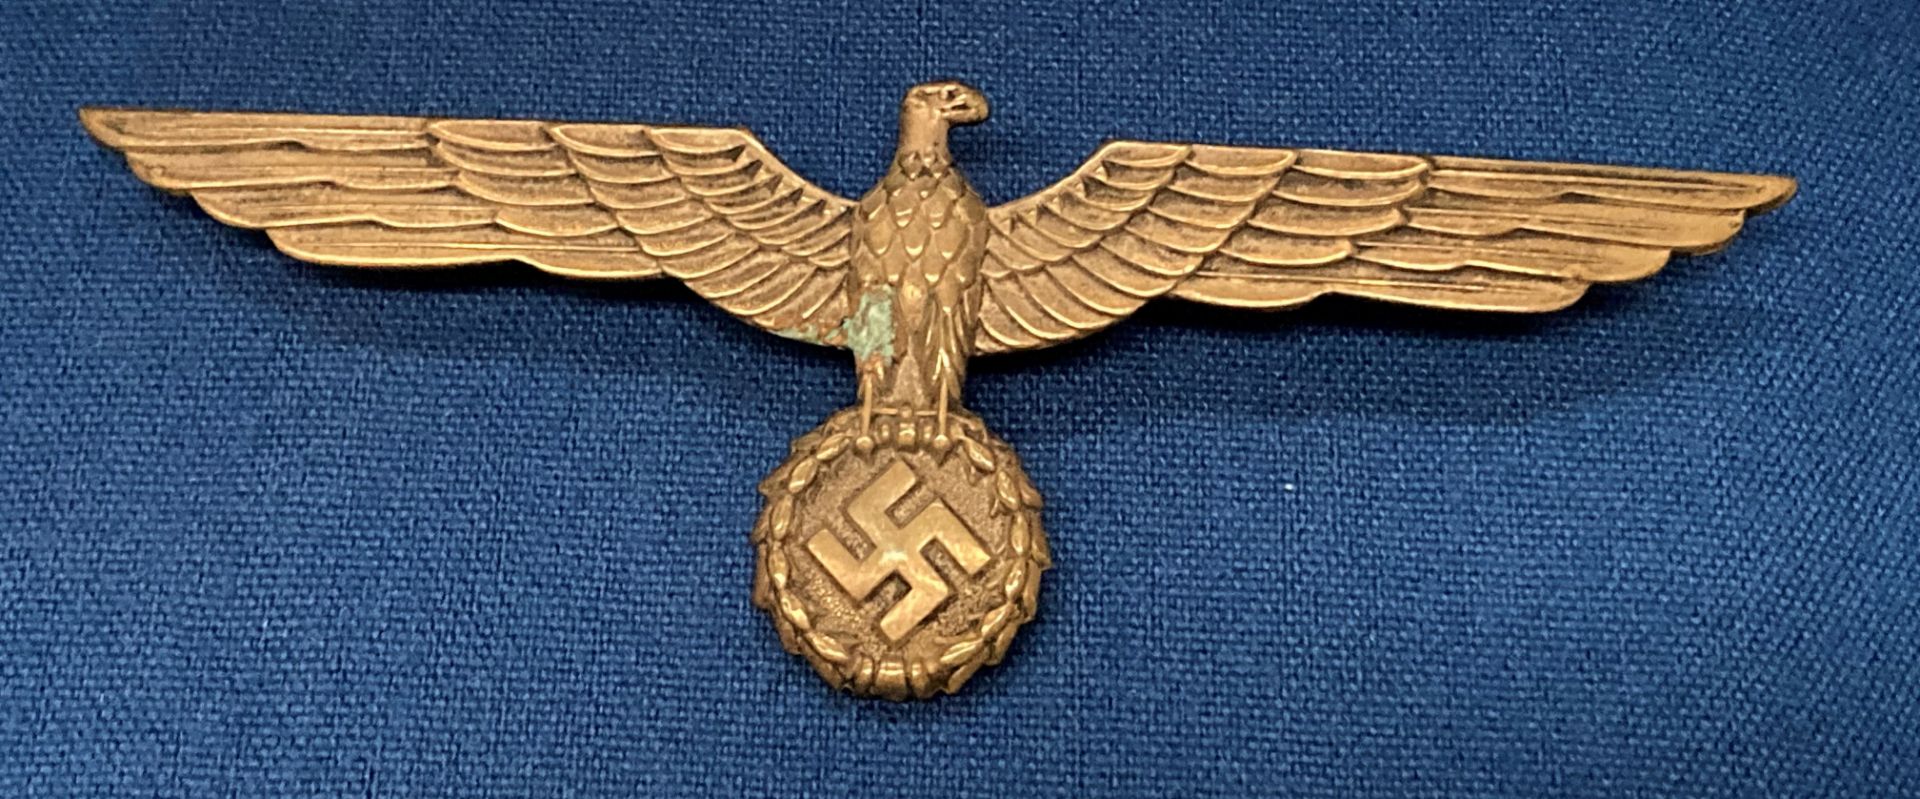 Two Nazi Party brass badges (Saleroom location: S3 GC1) - Image 2 of 5